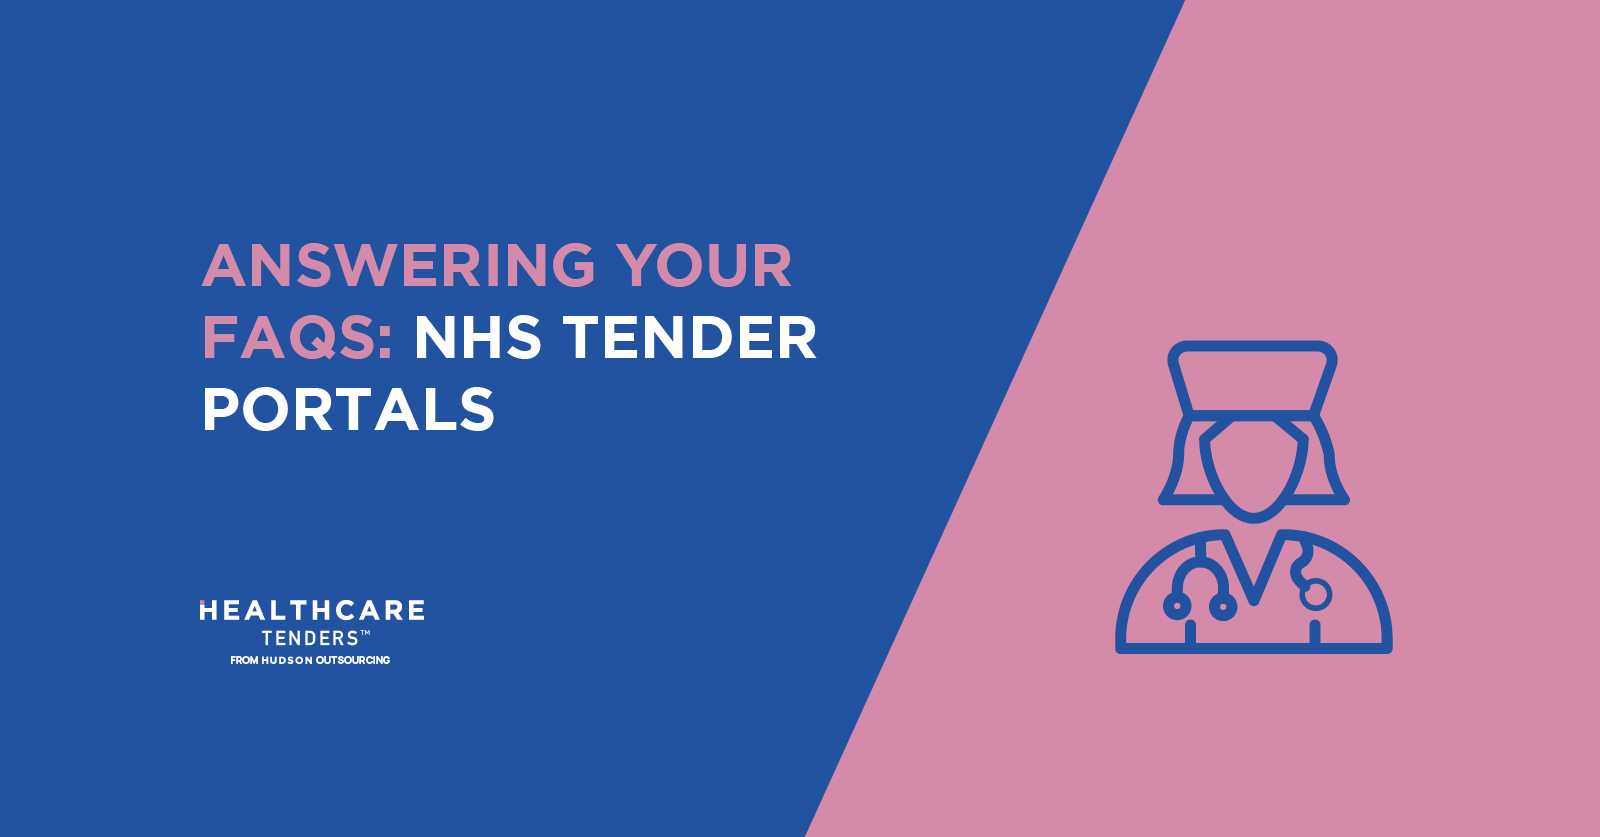 Where to Find an NHS Tender Portal